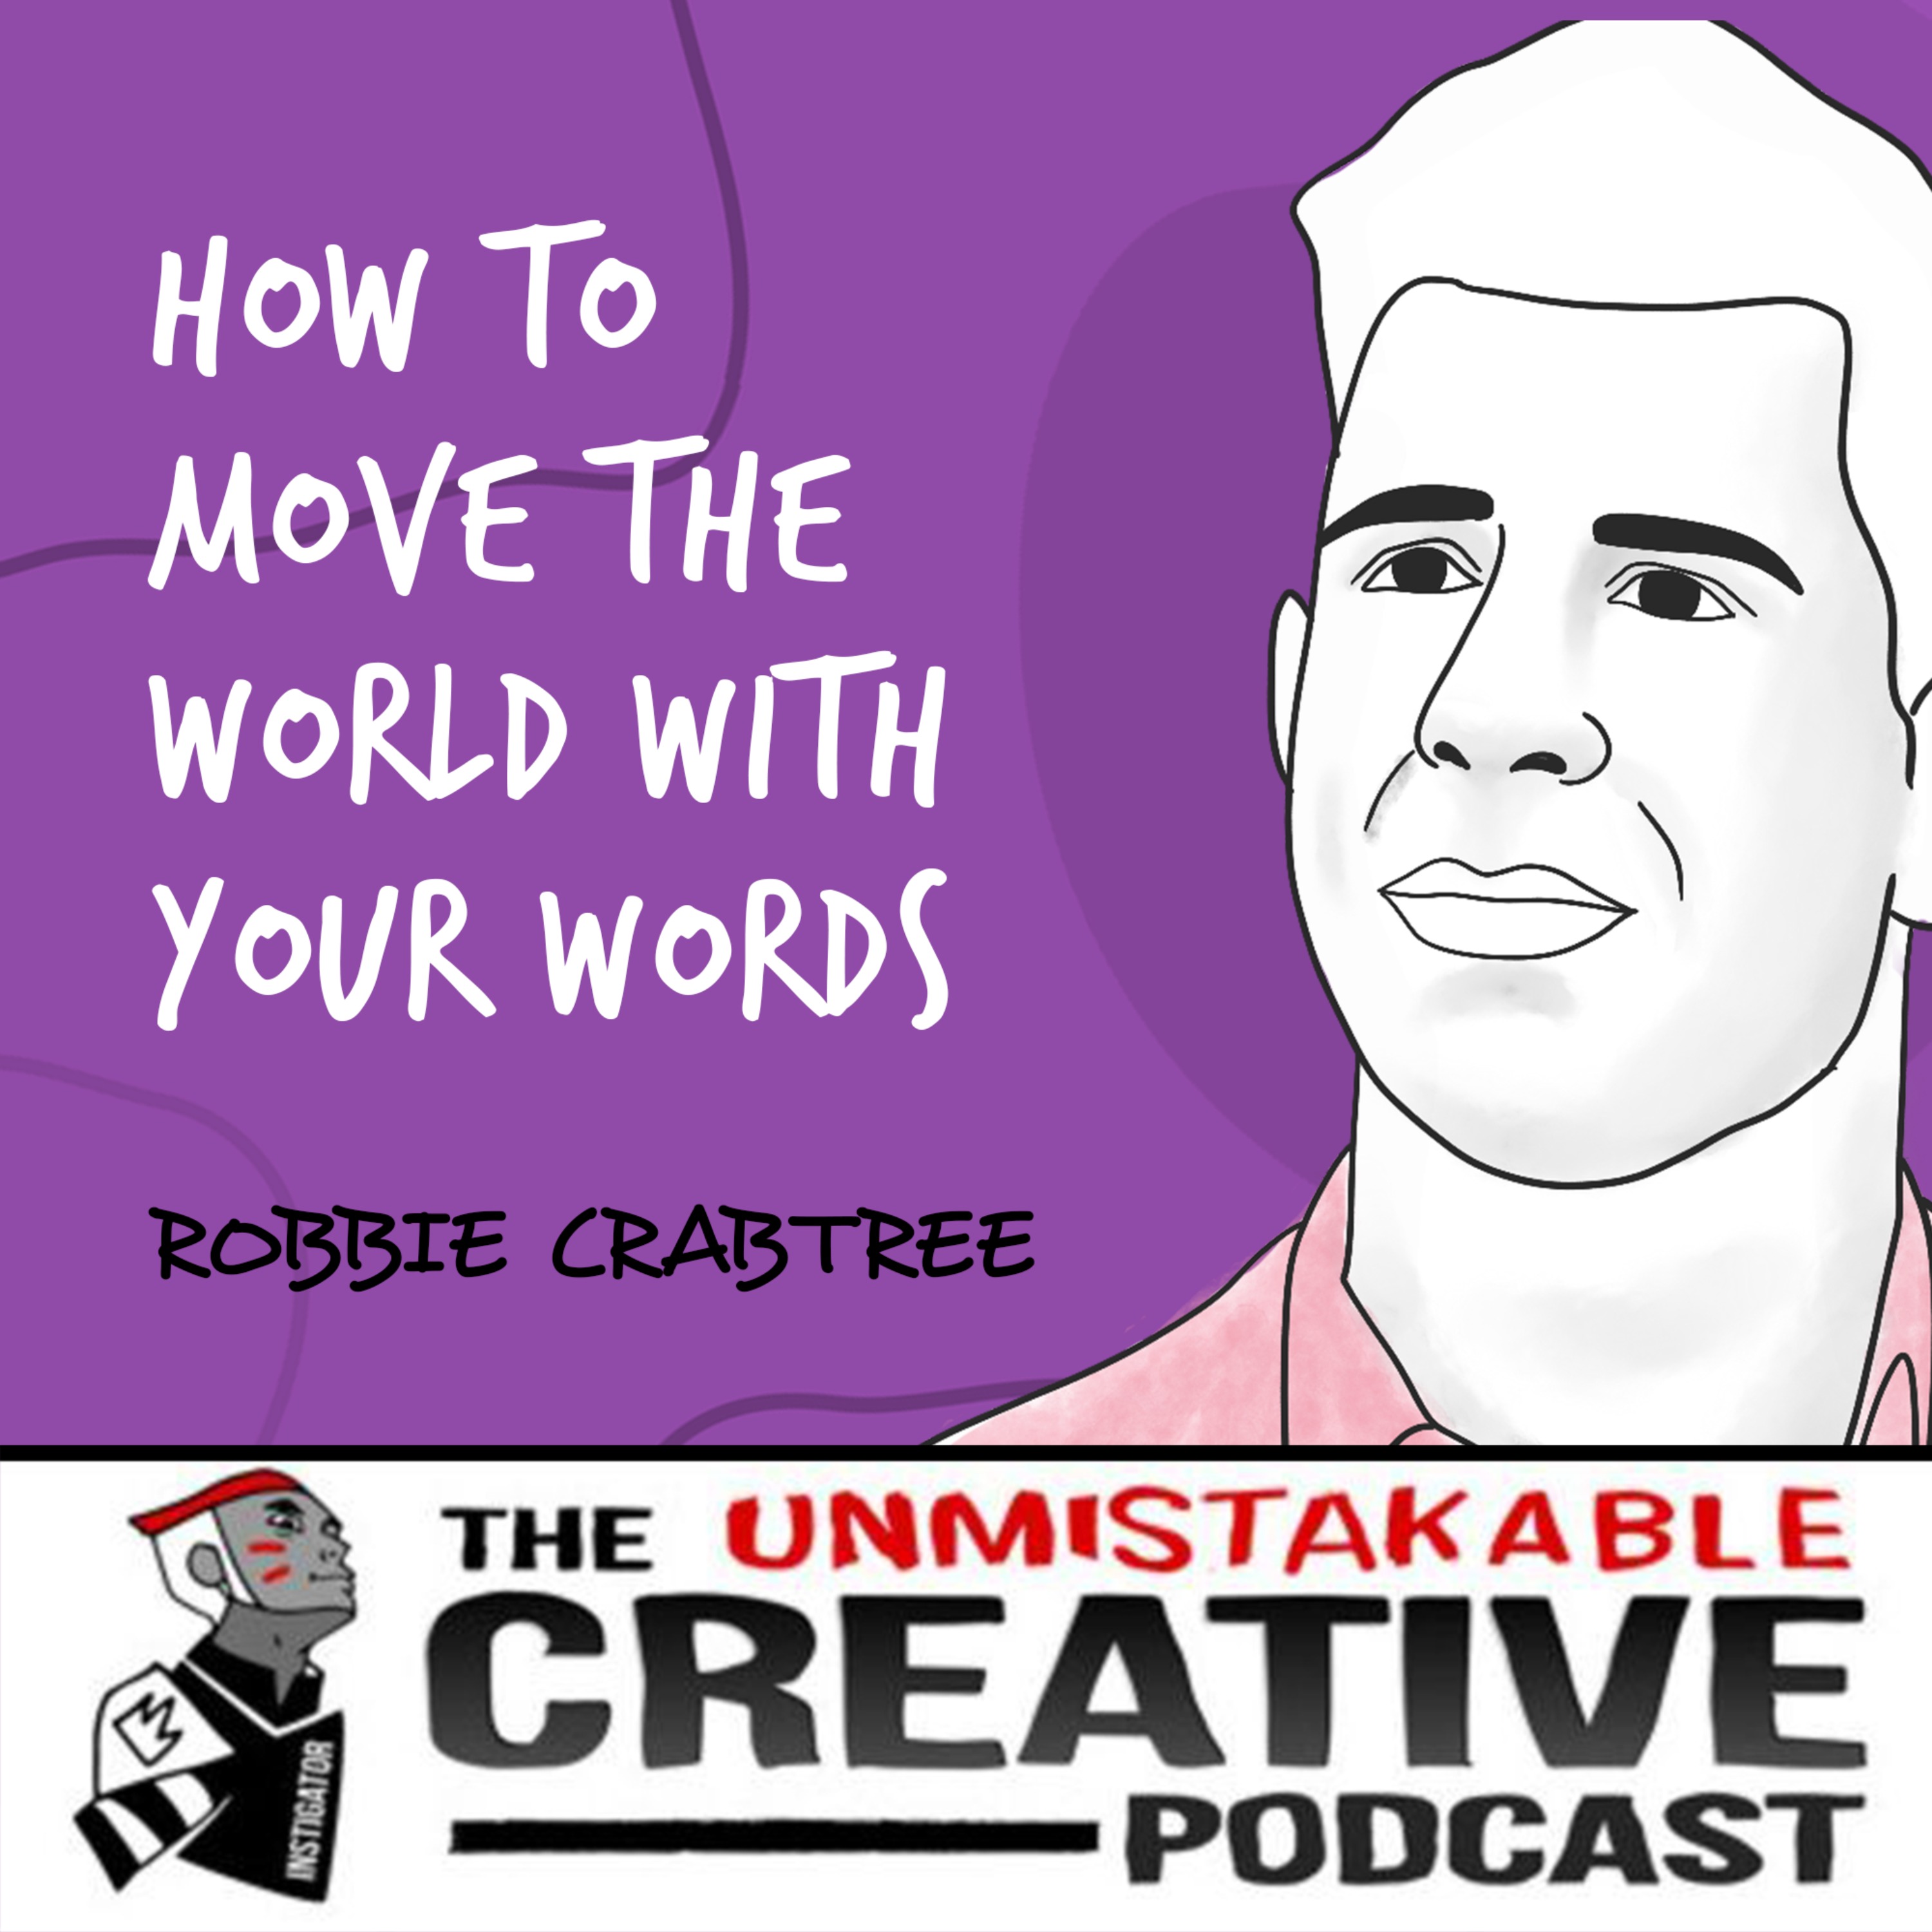 Robbie Crabtree | How to Move the World with Your Words Image